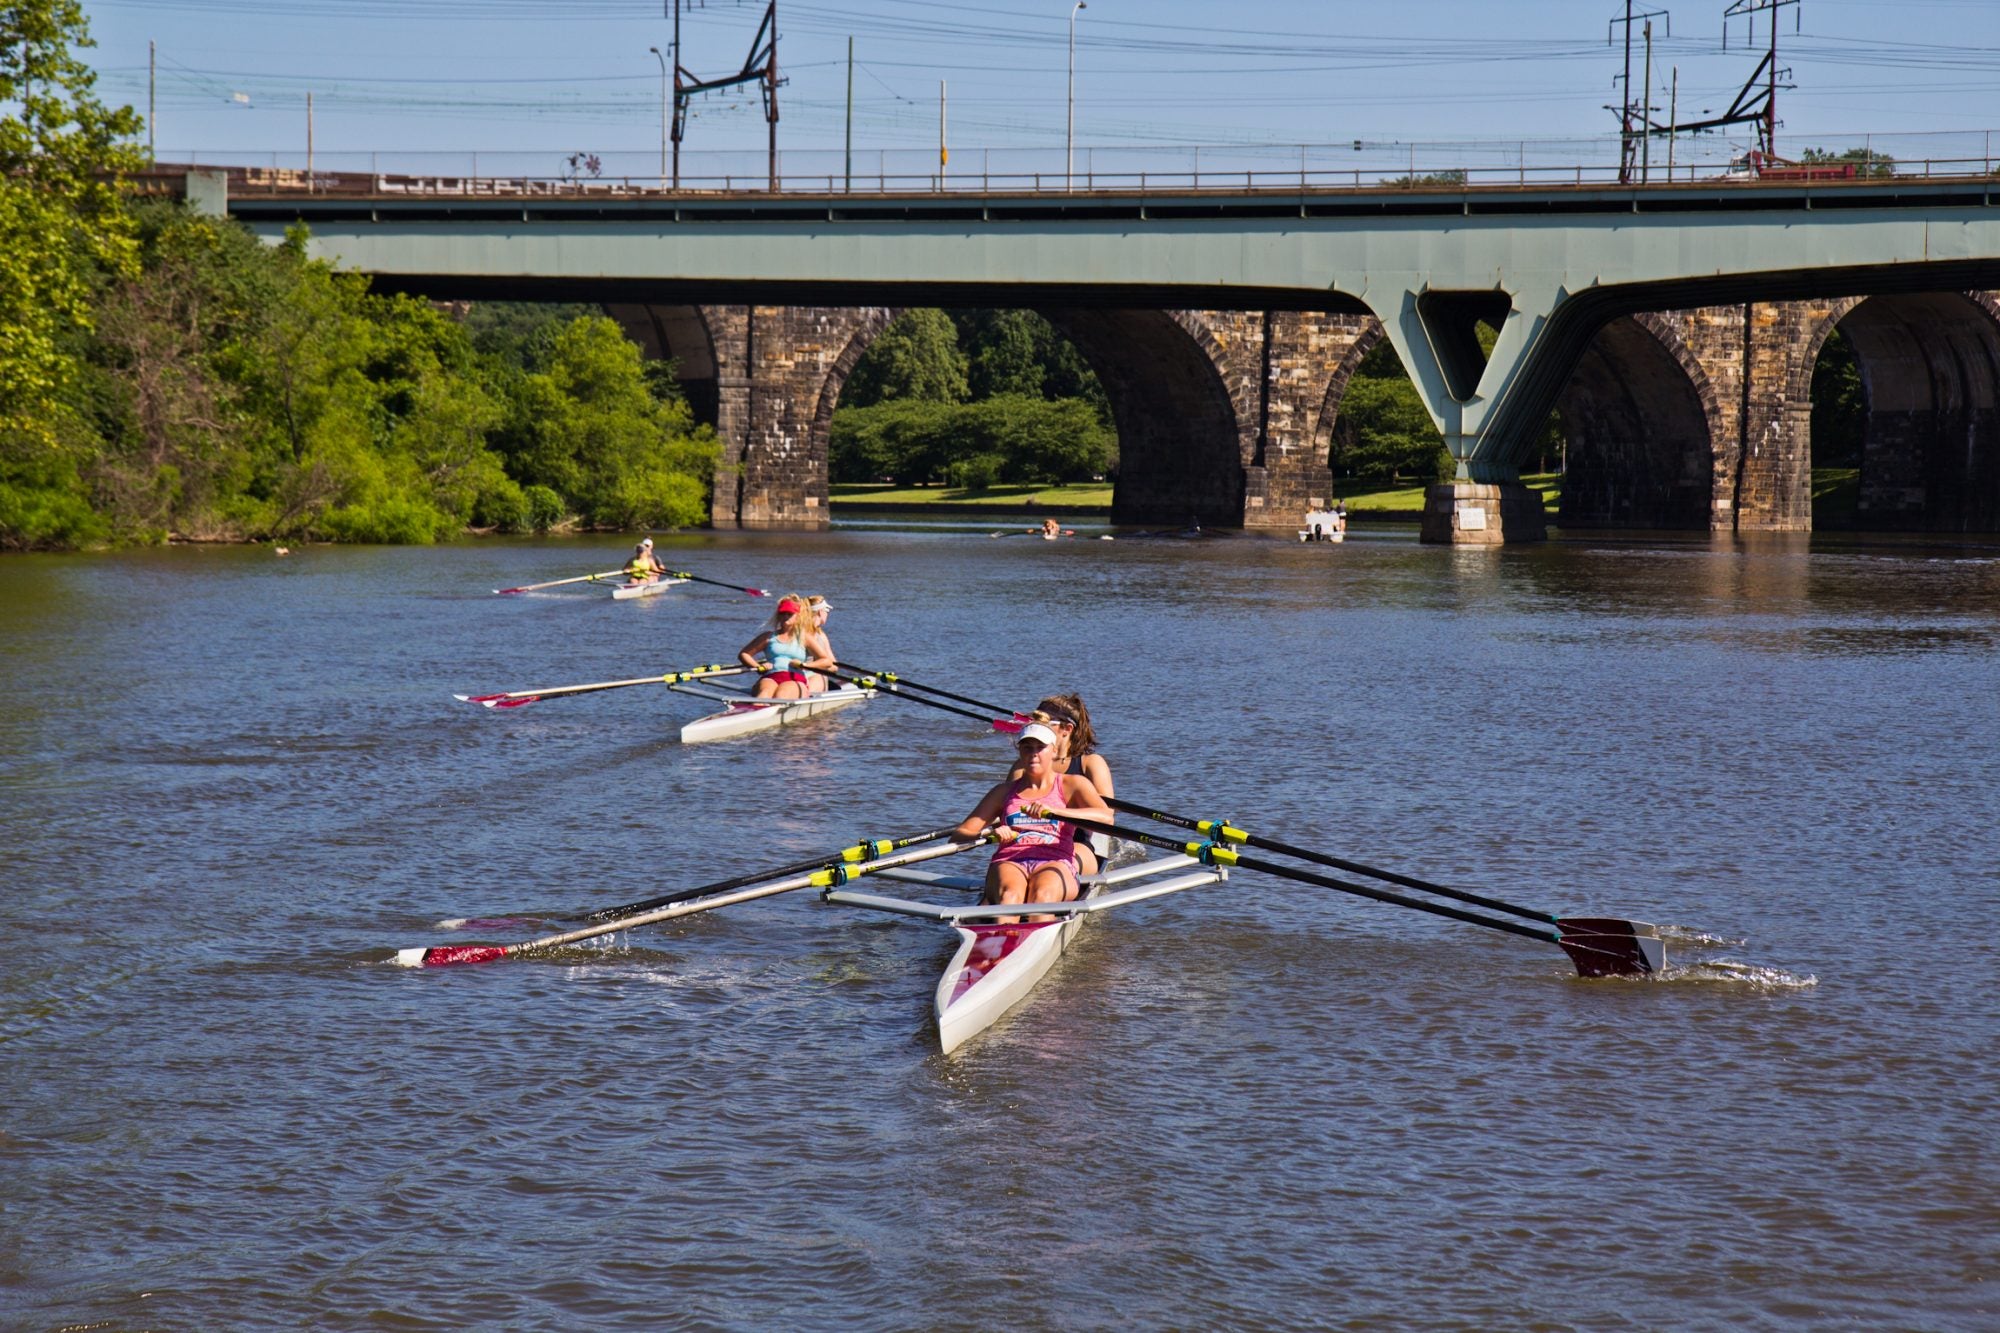 Olympic hopefuls prep for 2028 at Philly rowing camp WHYY